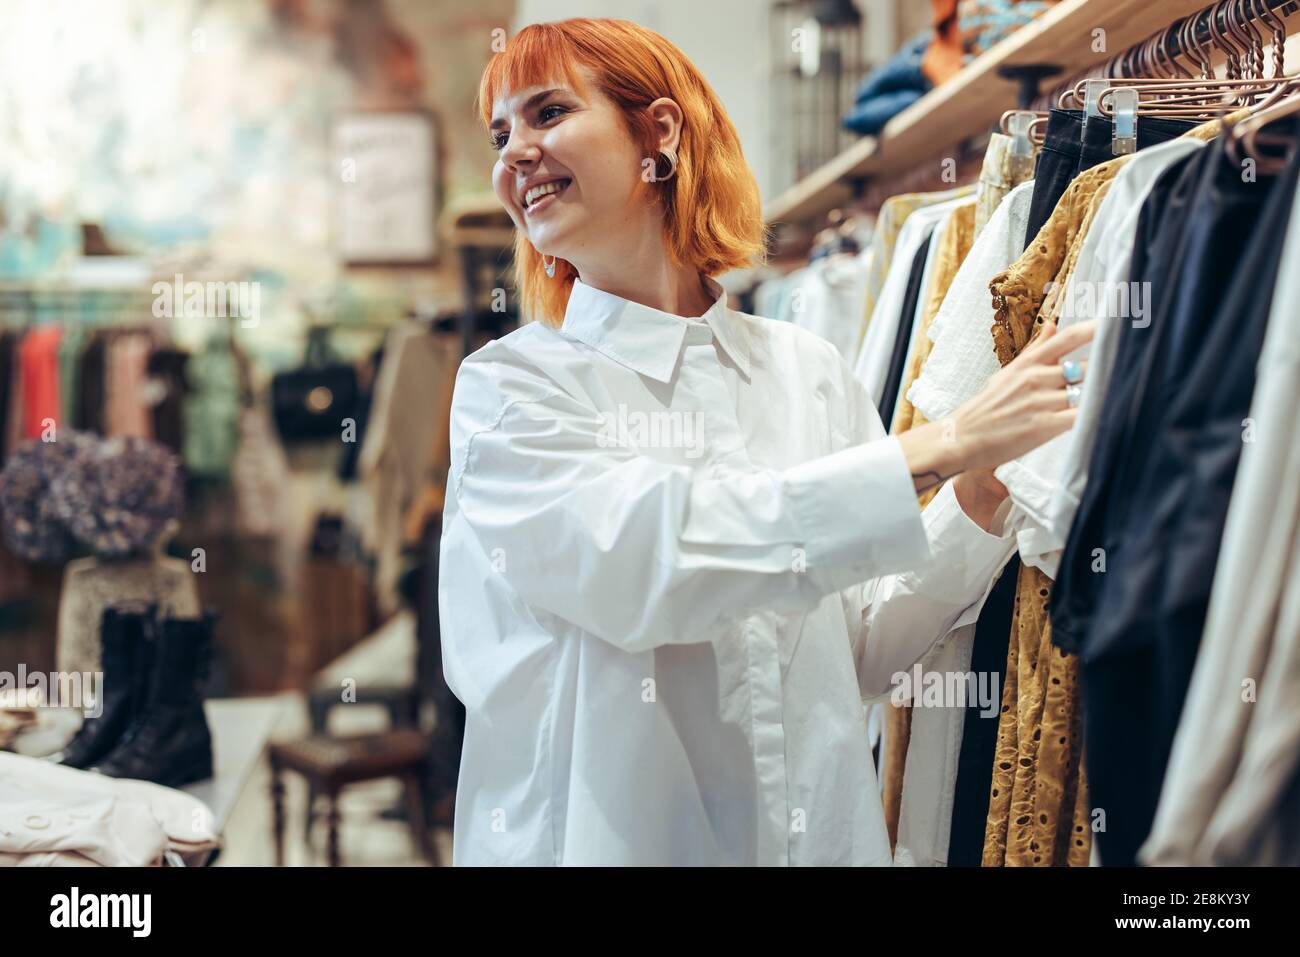 Attractive woman choosing clothes in shop. Female customer looking at fashionable clothes in a store and smiling. Stock Photo